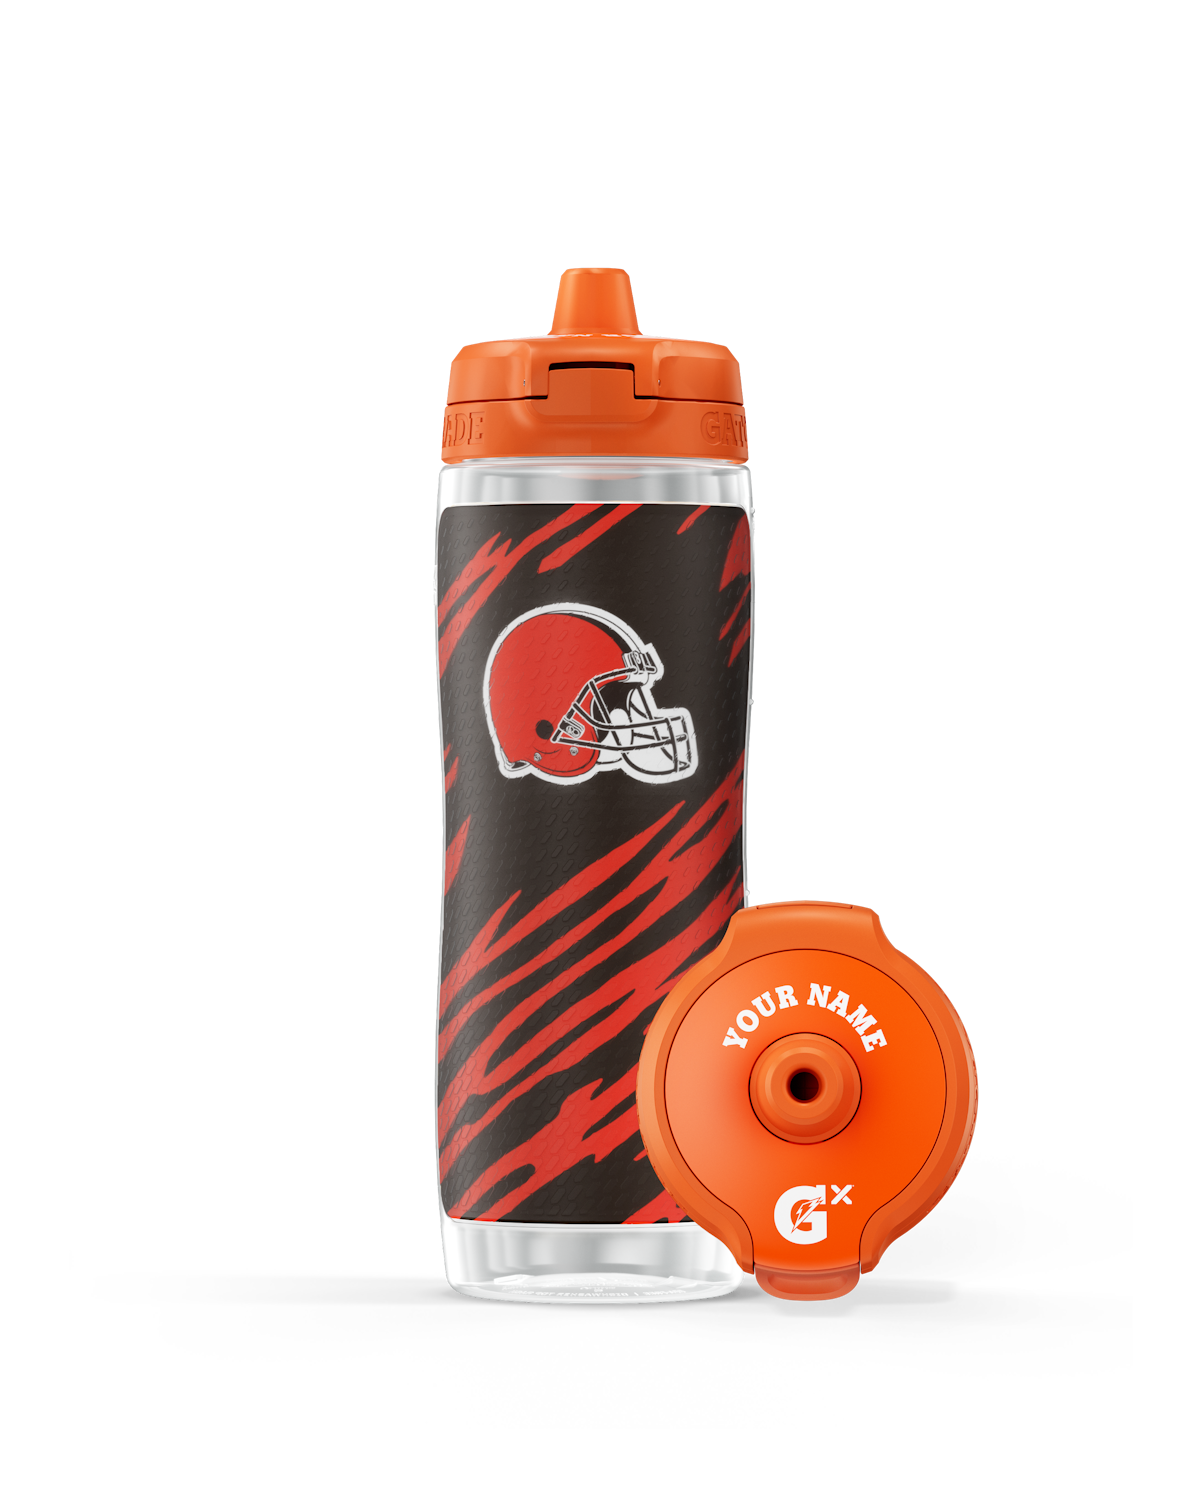 Cleveland Browns Team Logo 24oz. Personalized Jr. Thirst Water Bottle